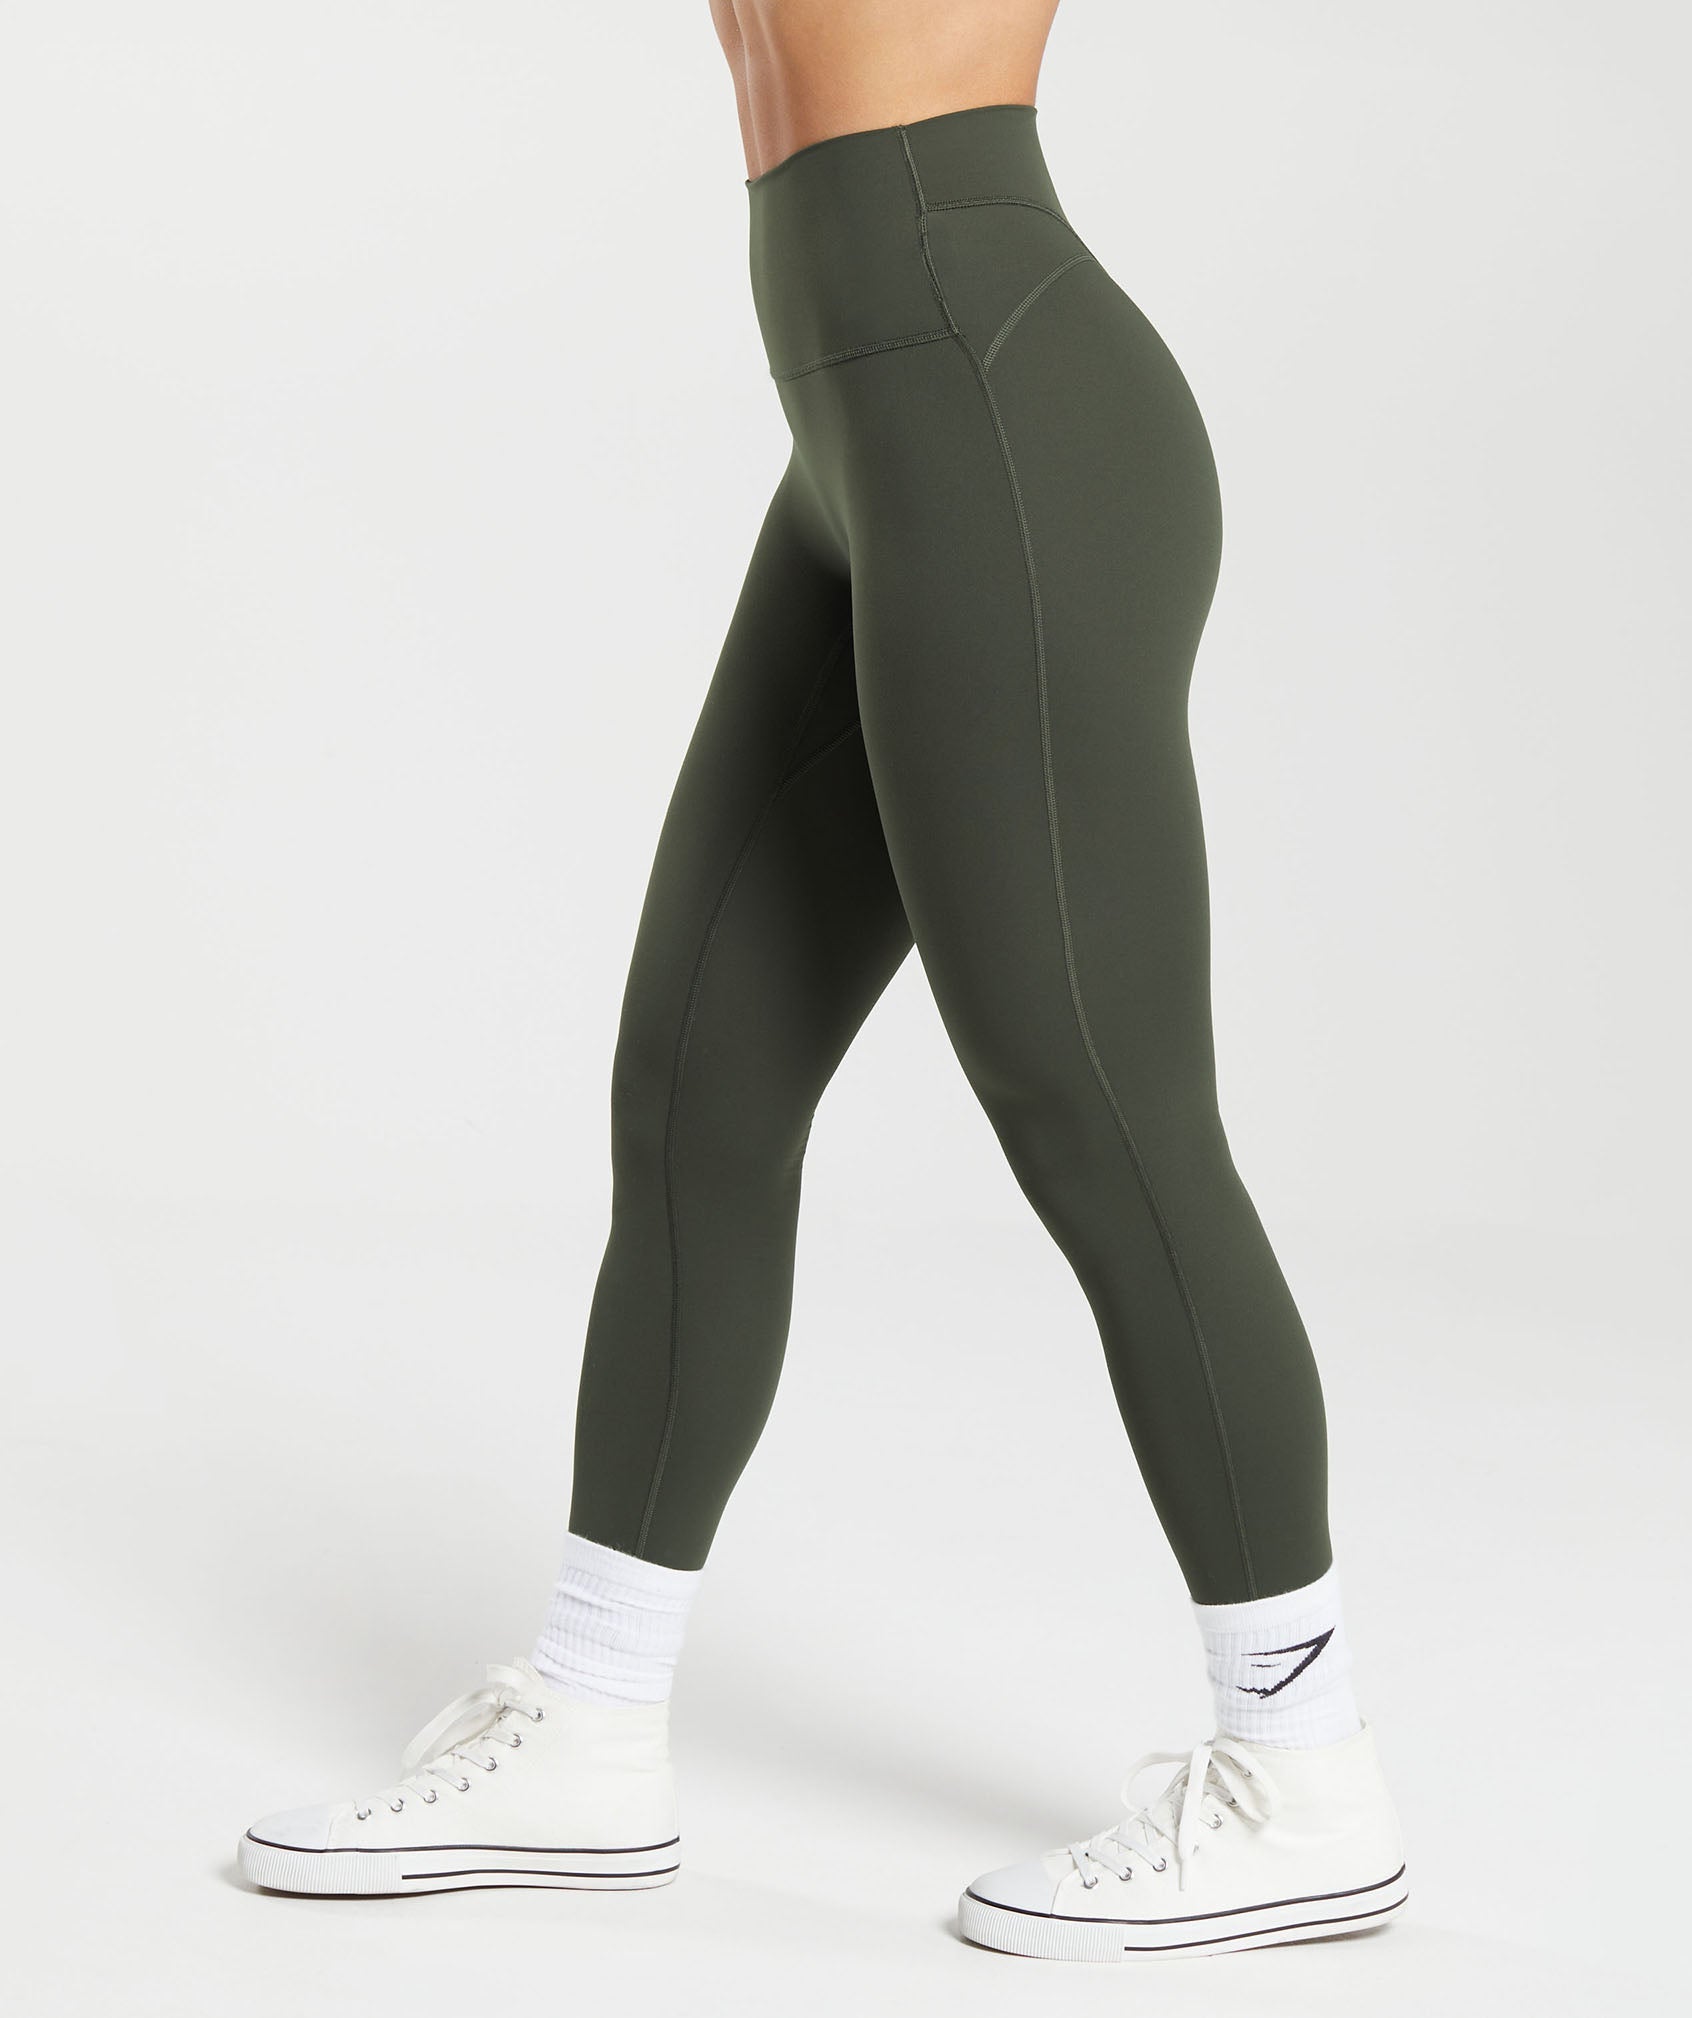 GYMSHARK WOMEN'S ENERGY+ Seamless Leggings Olive Green Size Extra Small EUR  35,01 - PicClick FR